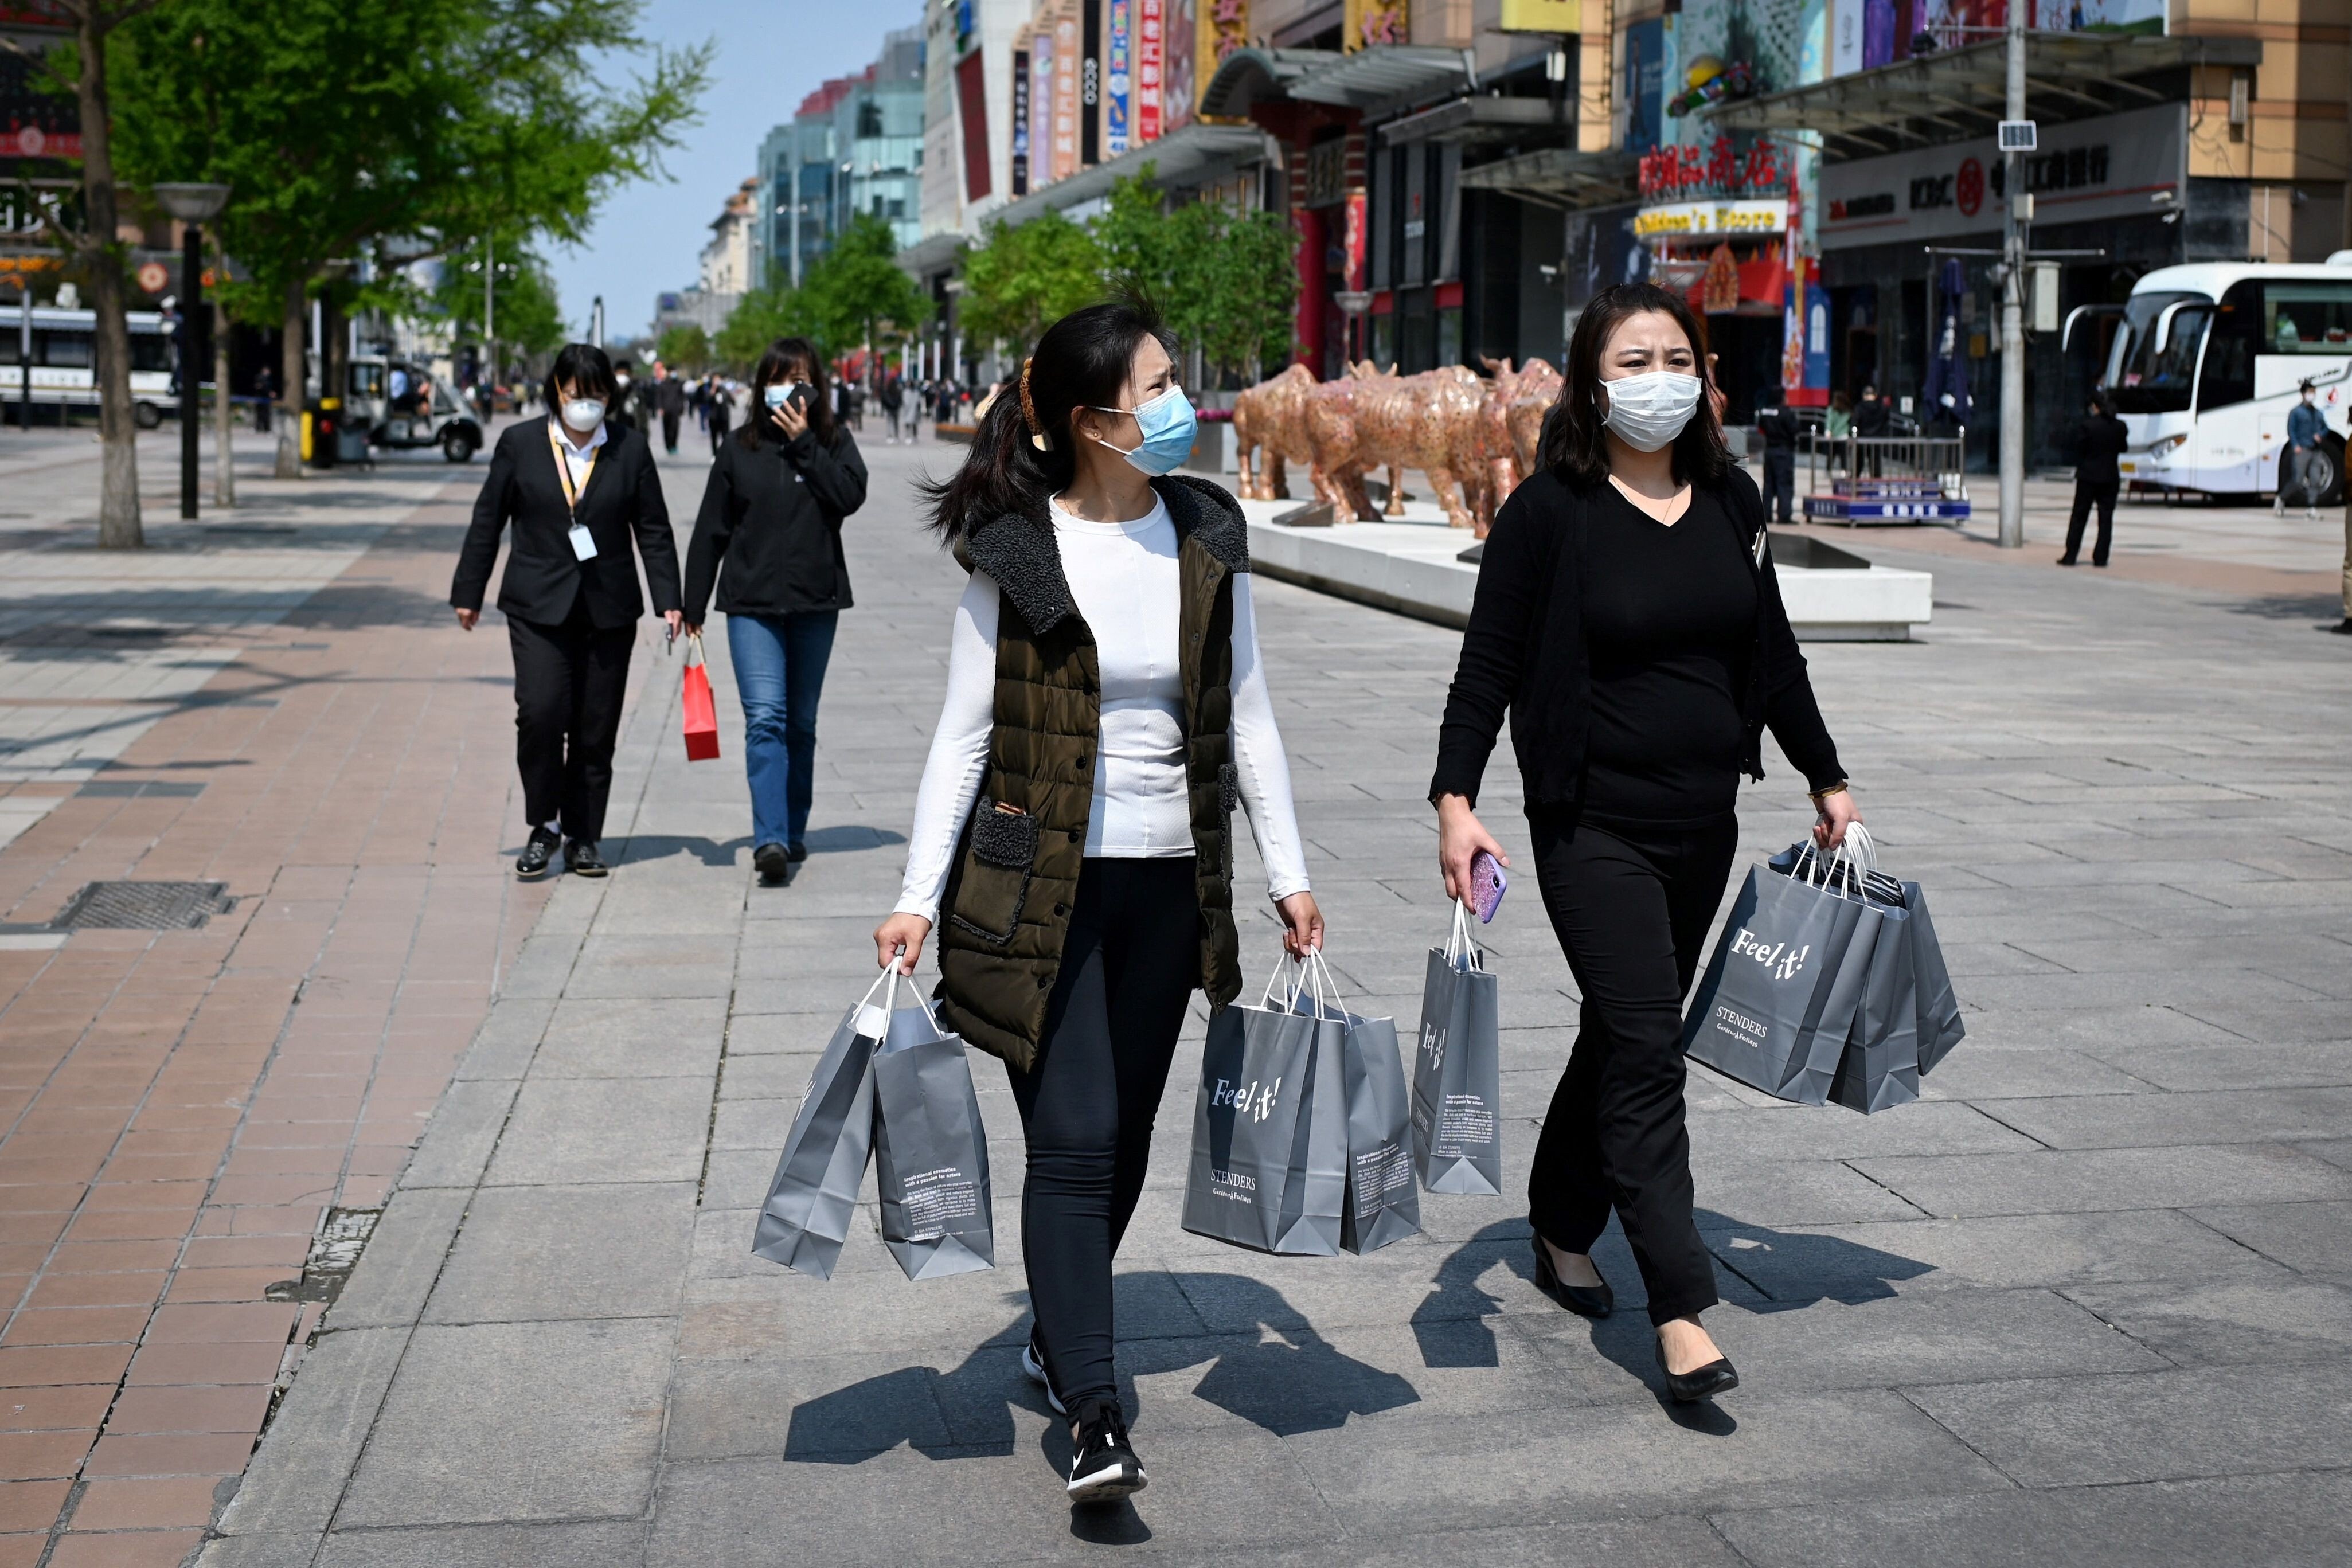 China’s retail sales were strong in the first half of the year, but consumer confidence has not yet fully recovered to pre-pandemic levels. Photo: AFP